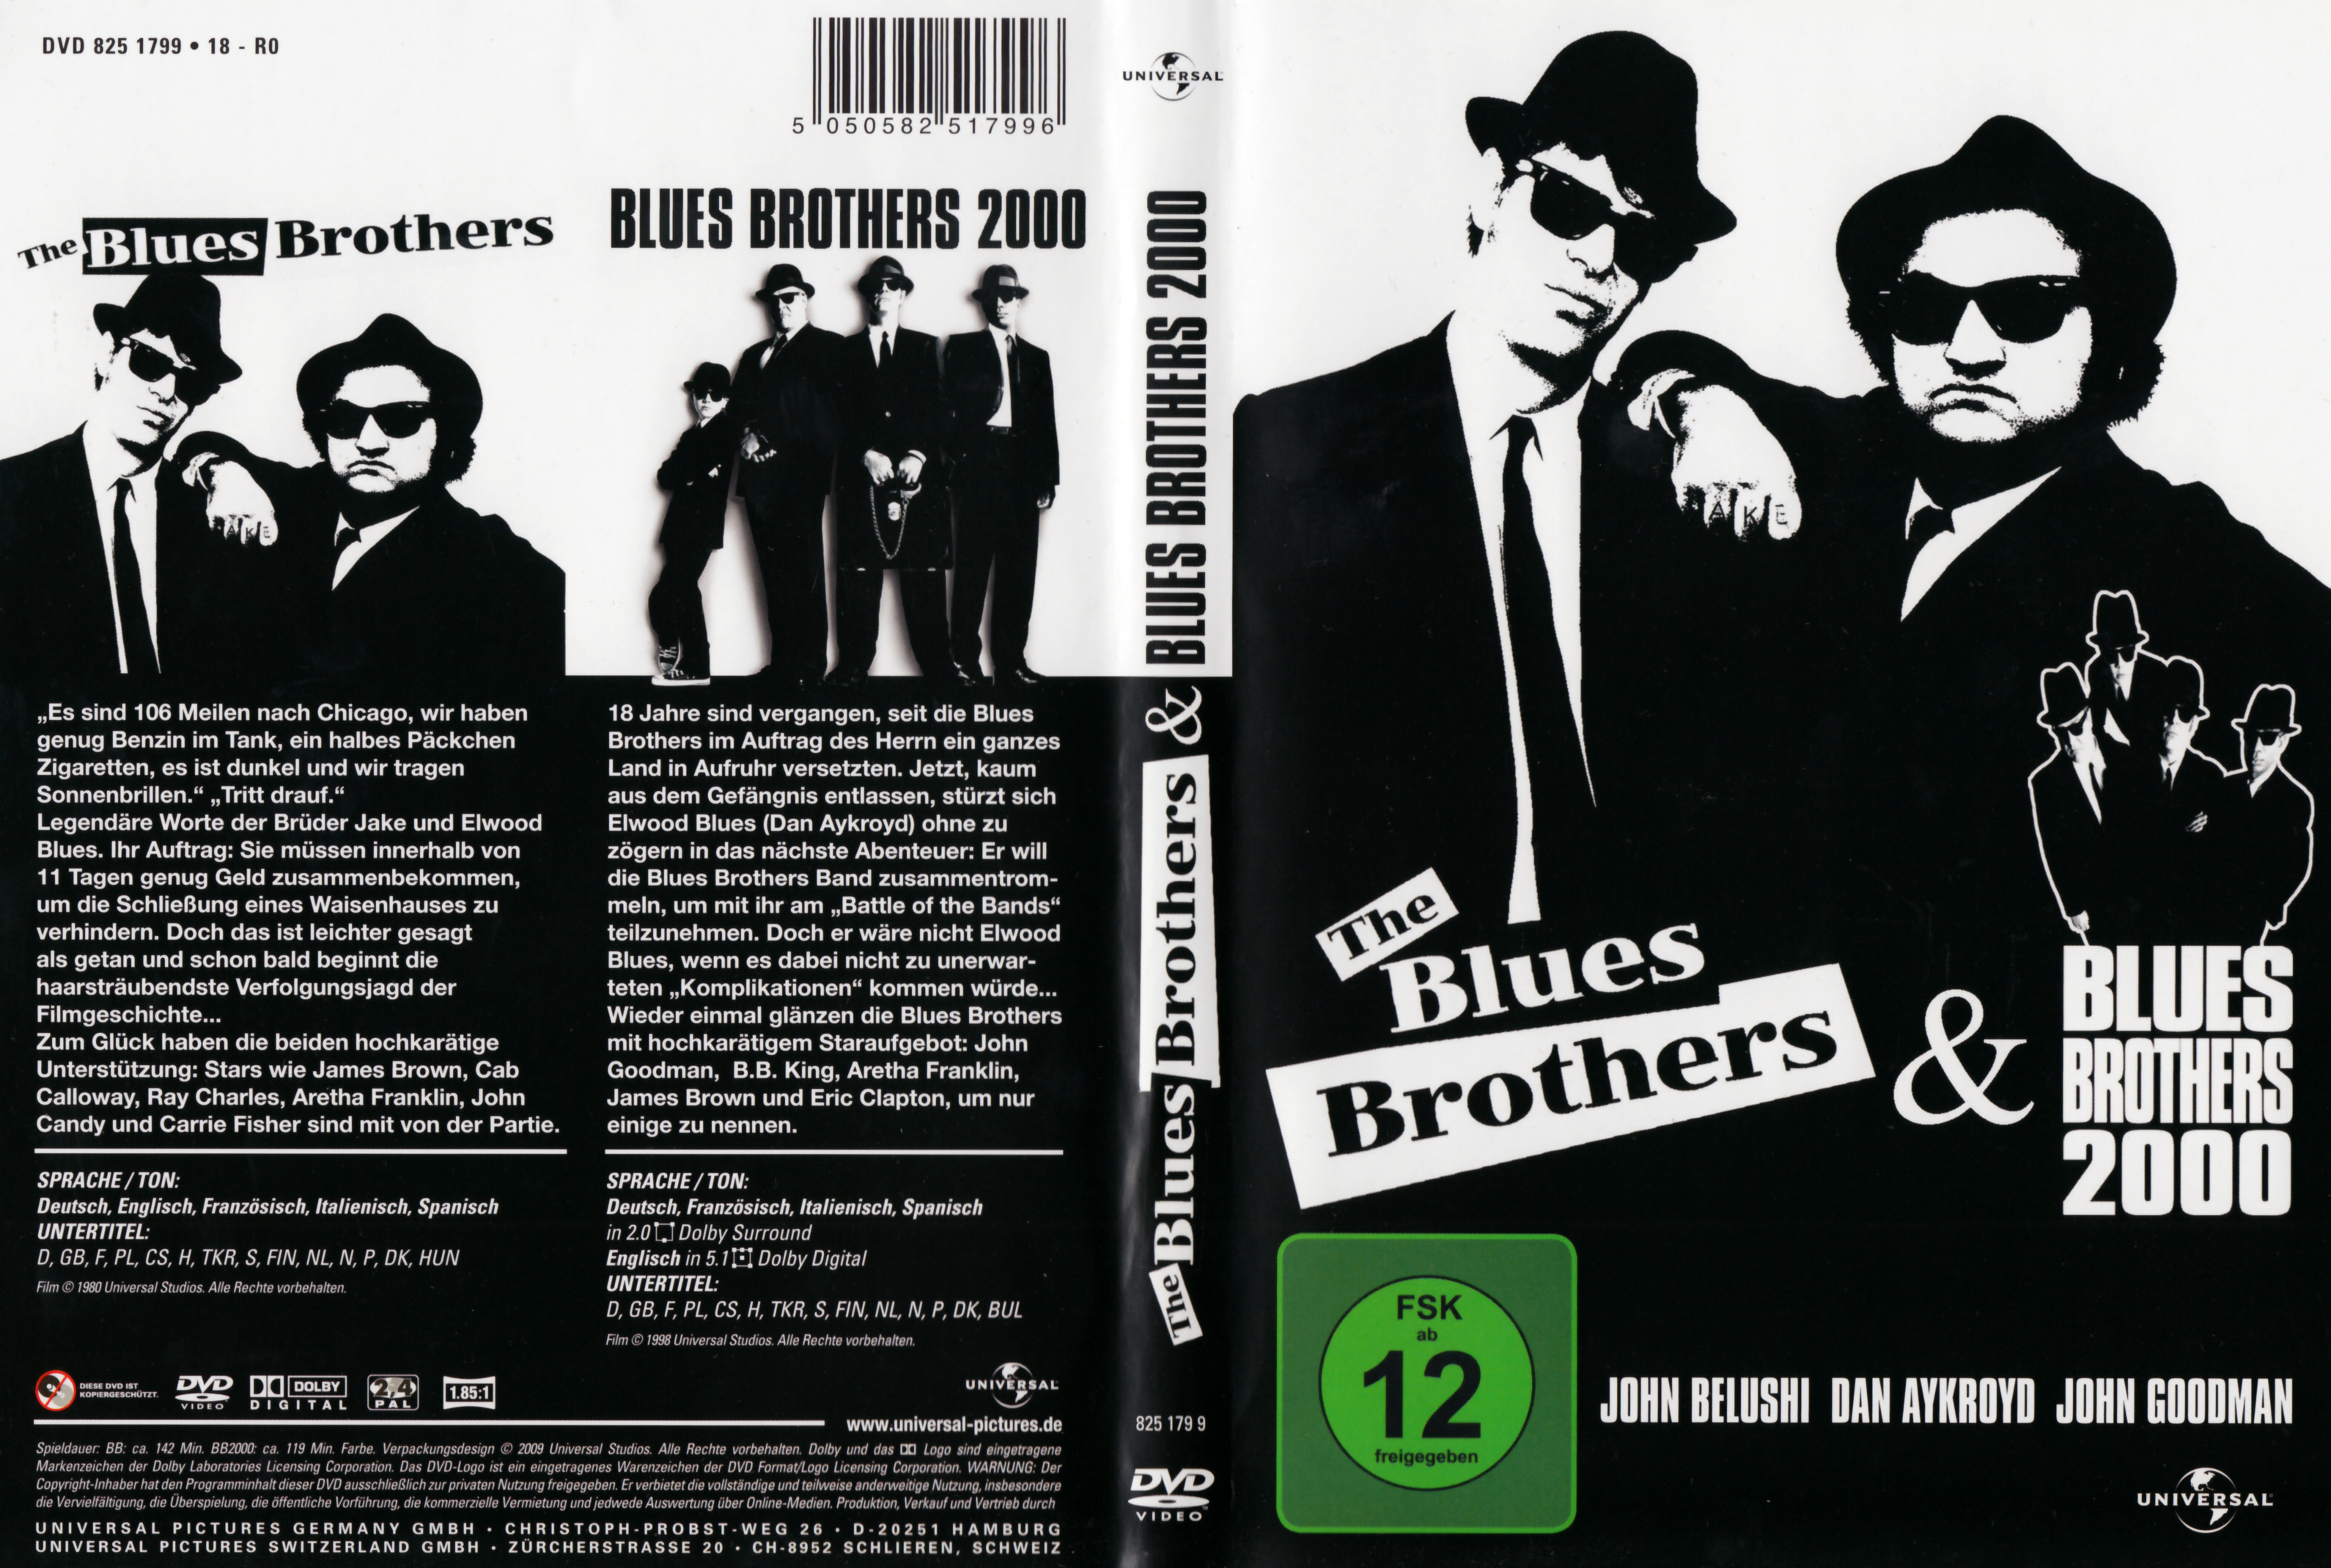 Jaquette DVD The Blues Brothers + Blues Brothers 2000 Zone 1